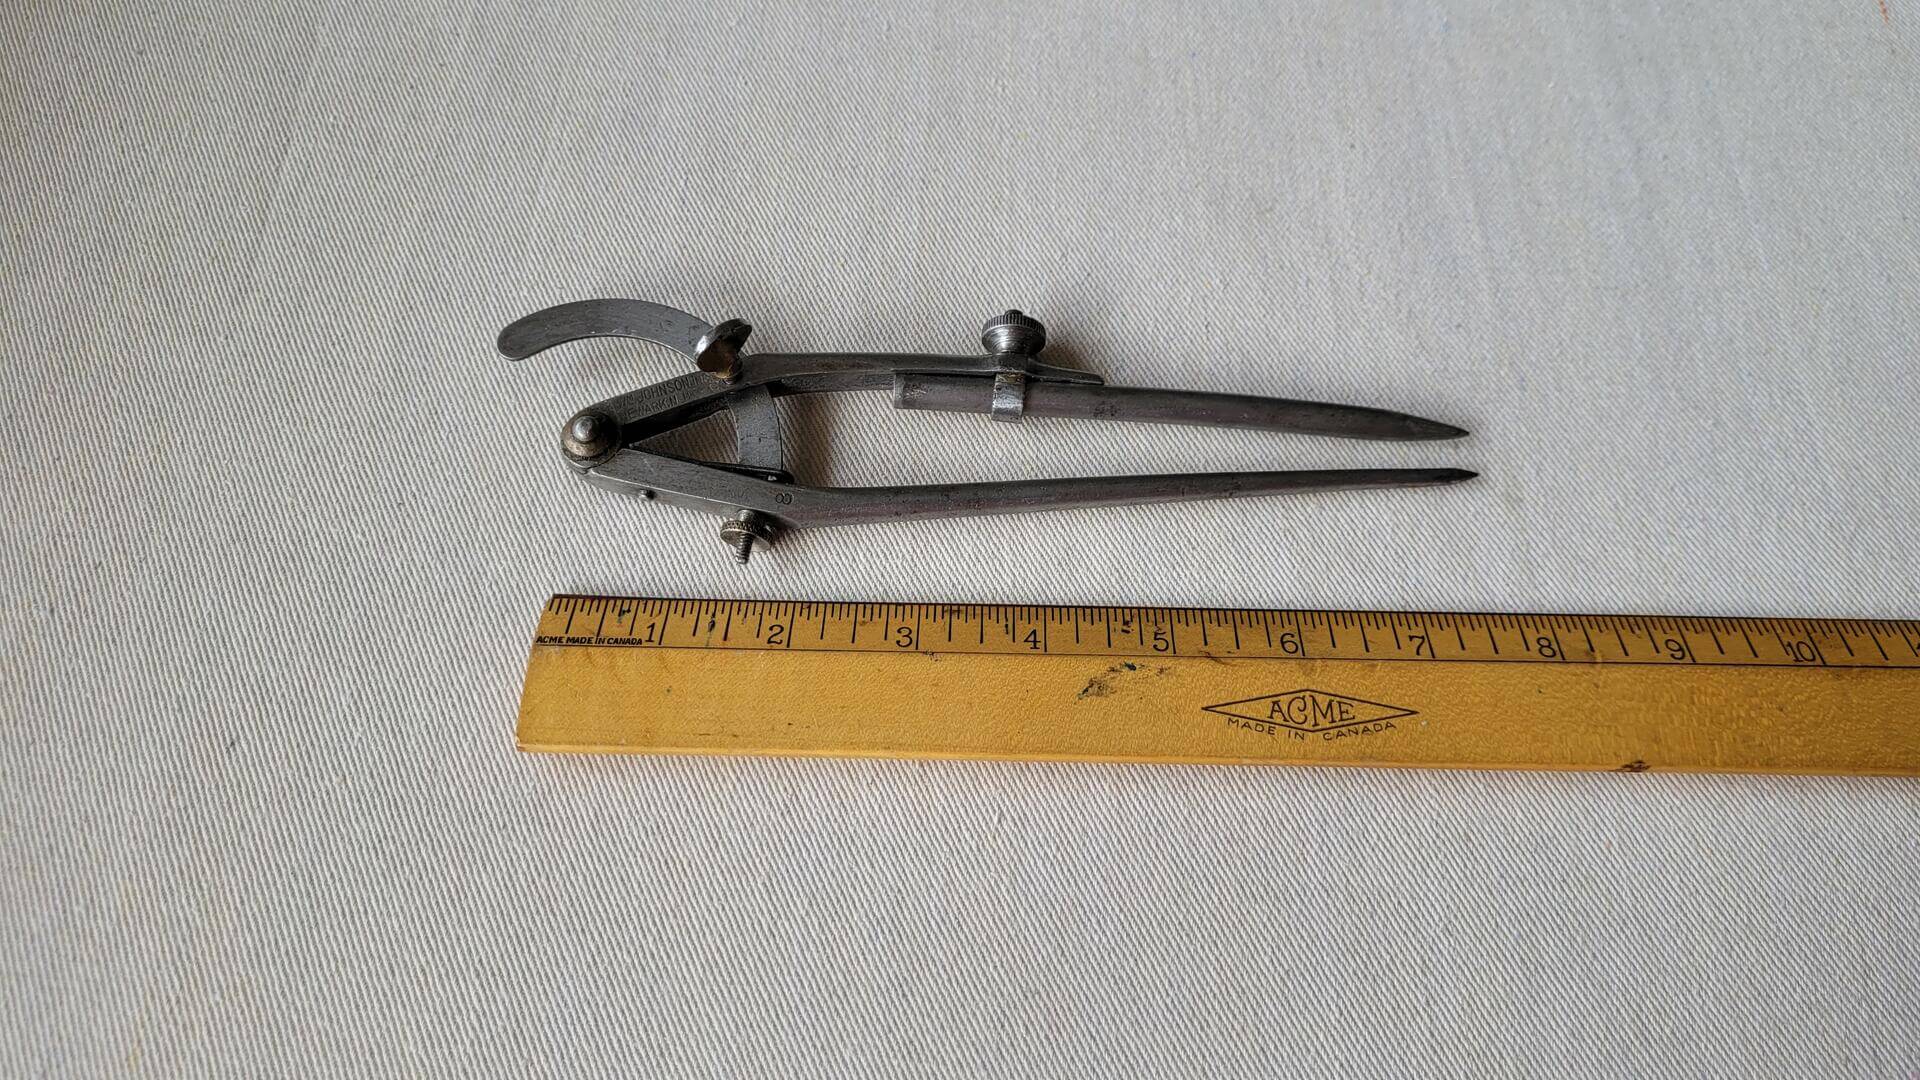 william-johnson-adjustable-wing-divider-caliper-compass-scribe-newark-nj-antique-vintage-made-in-usa-collectible-marking-tools-measurements